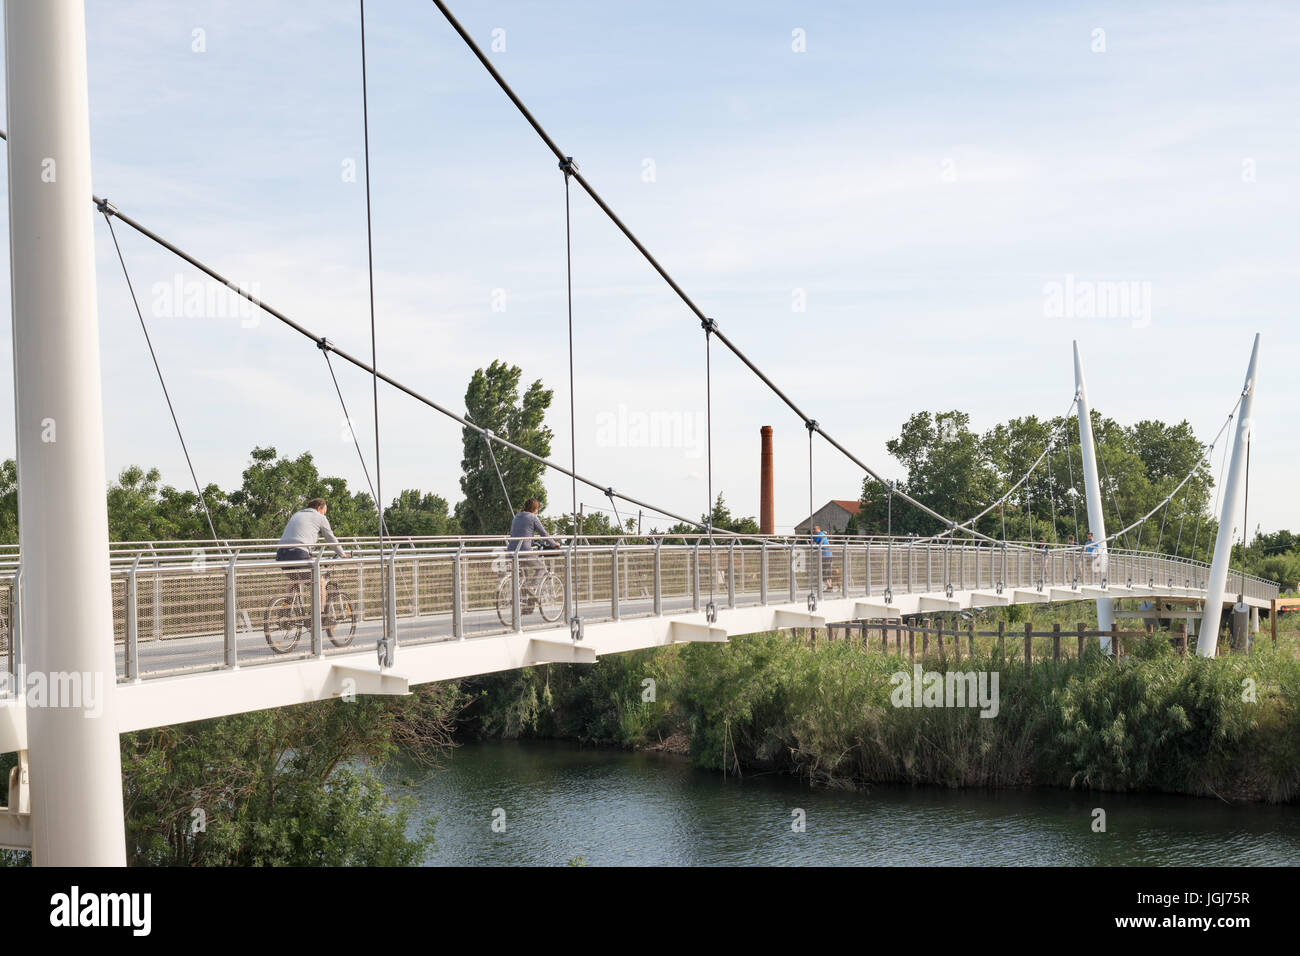 Footbridge carrying cycle path over river Orb, Sérignan, Hérault department, France Stock Photo